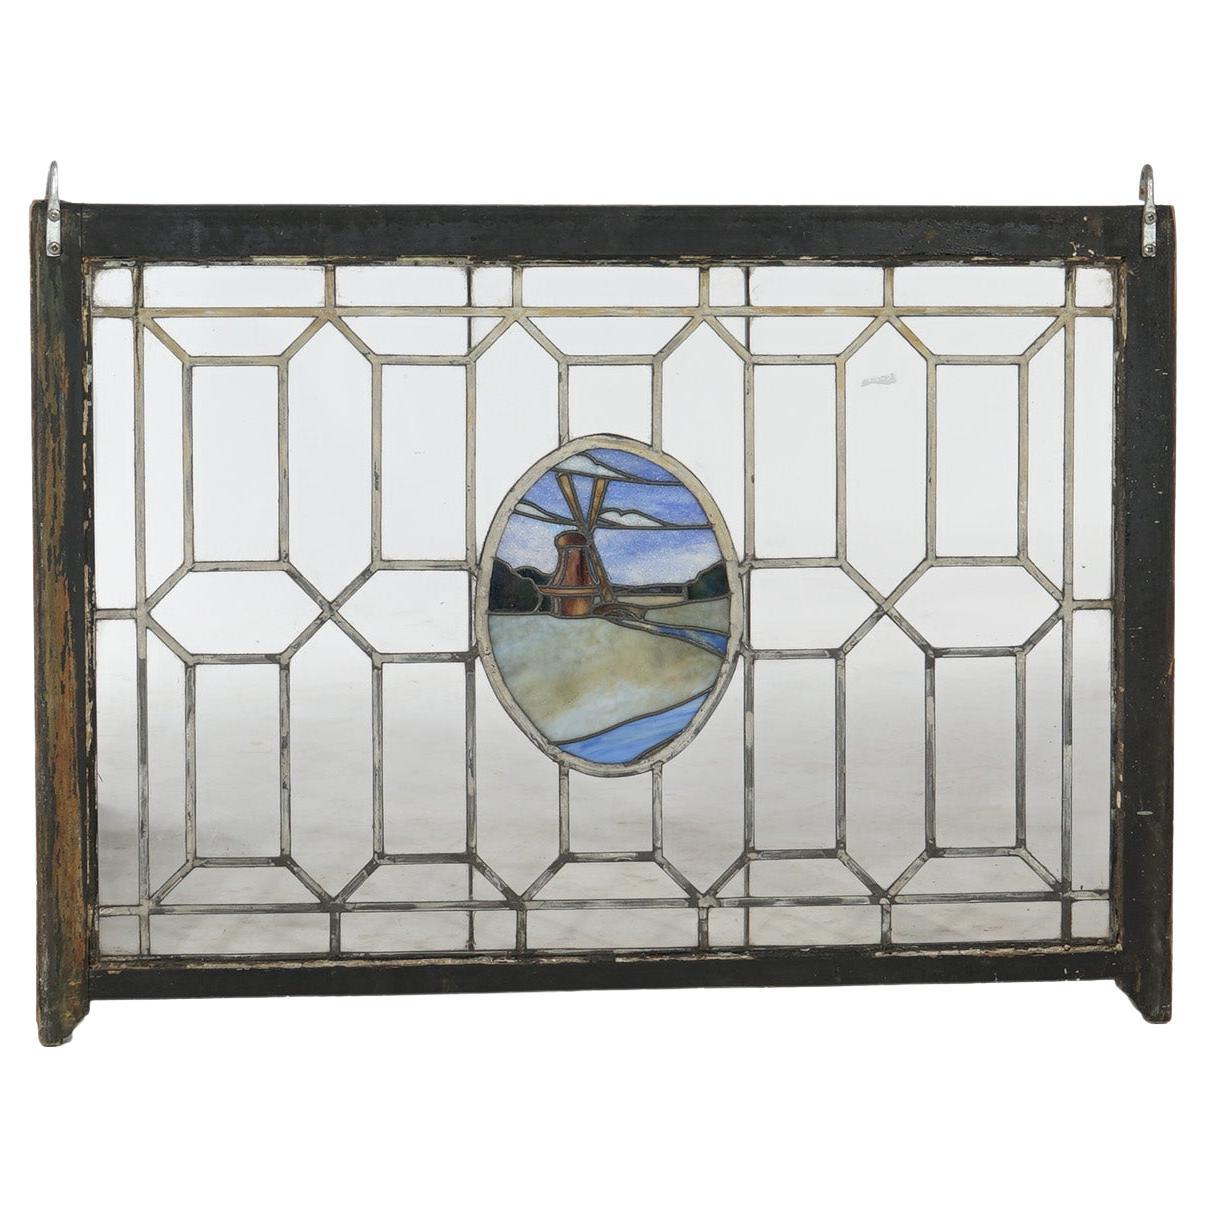 Antique Arts & Crafts Leaded & Stained Glass Window with Windmill, c1910 For Sale